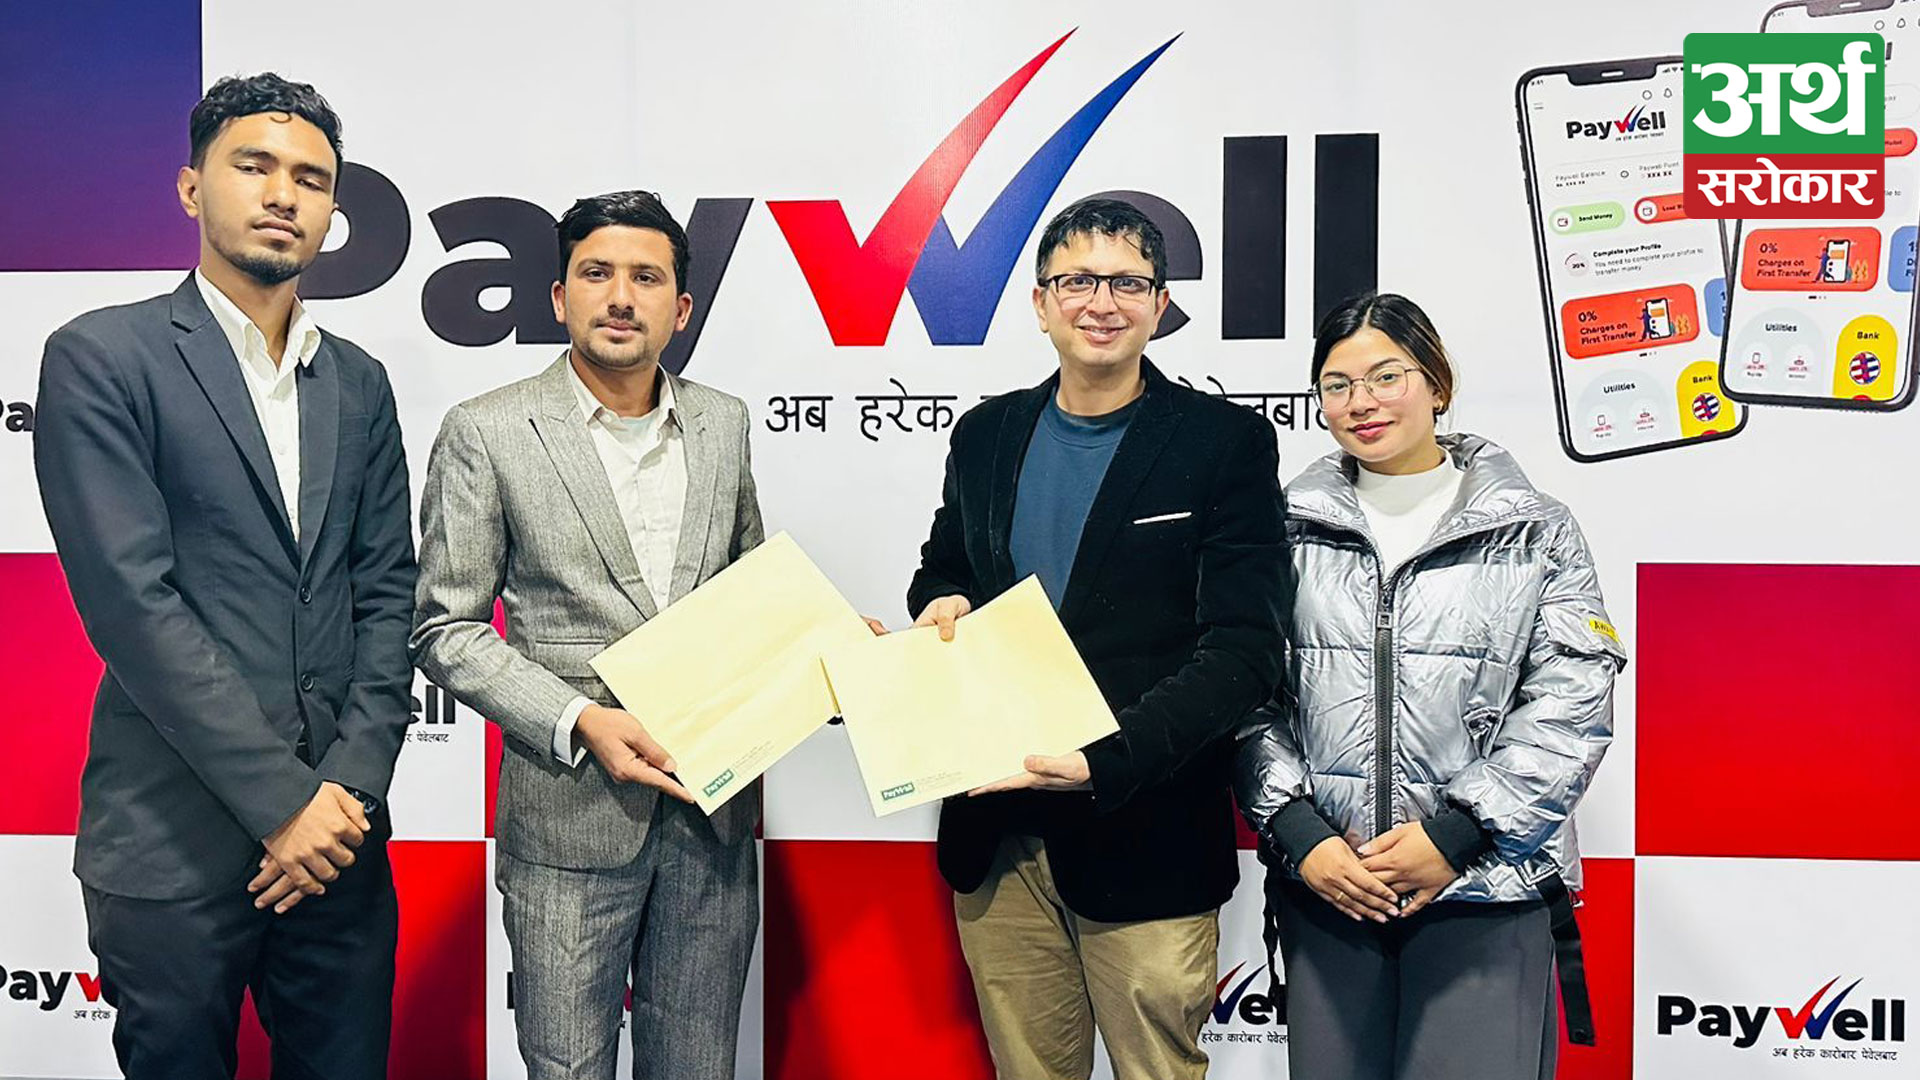 Paywell Nepal and Rock Band Championship-Season 2 announce official online voting partnership